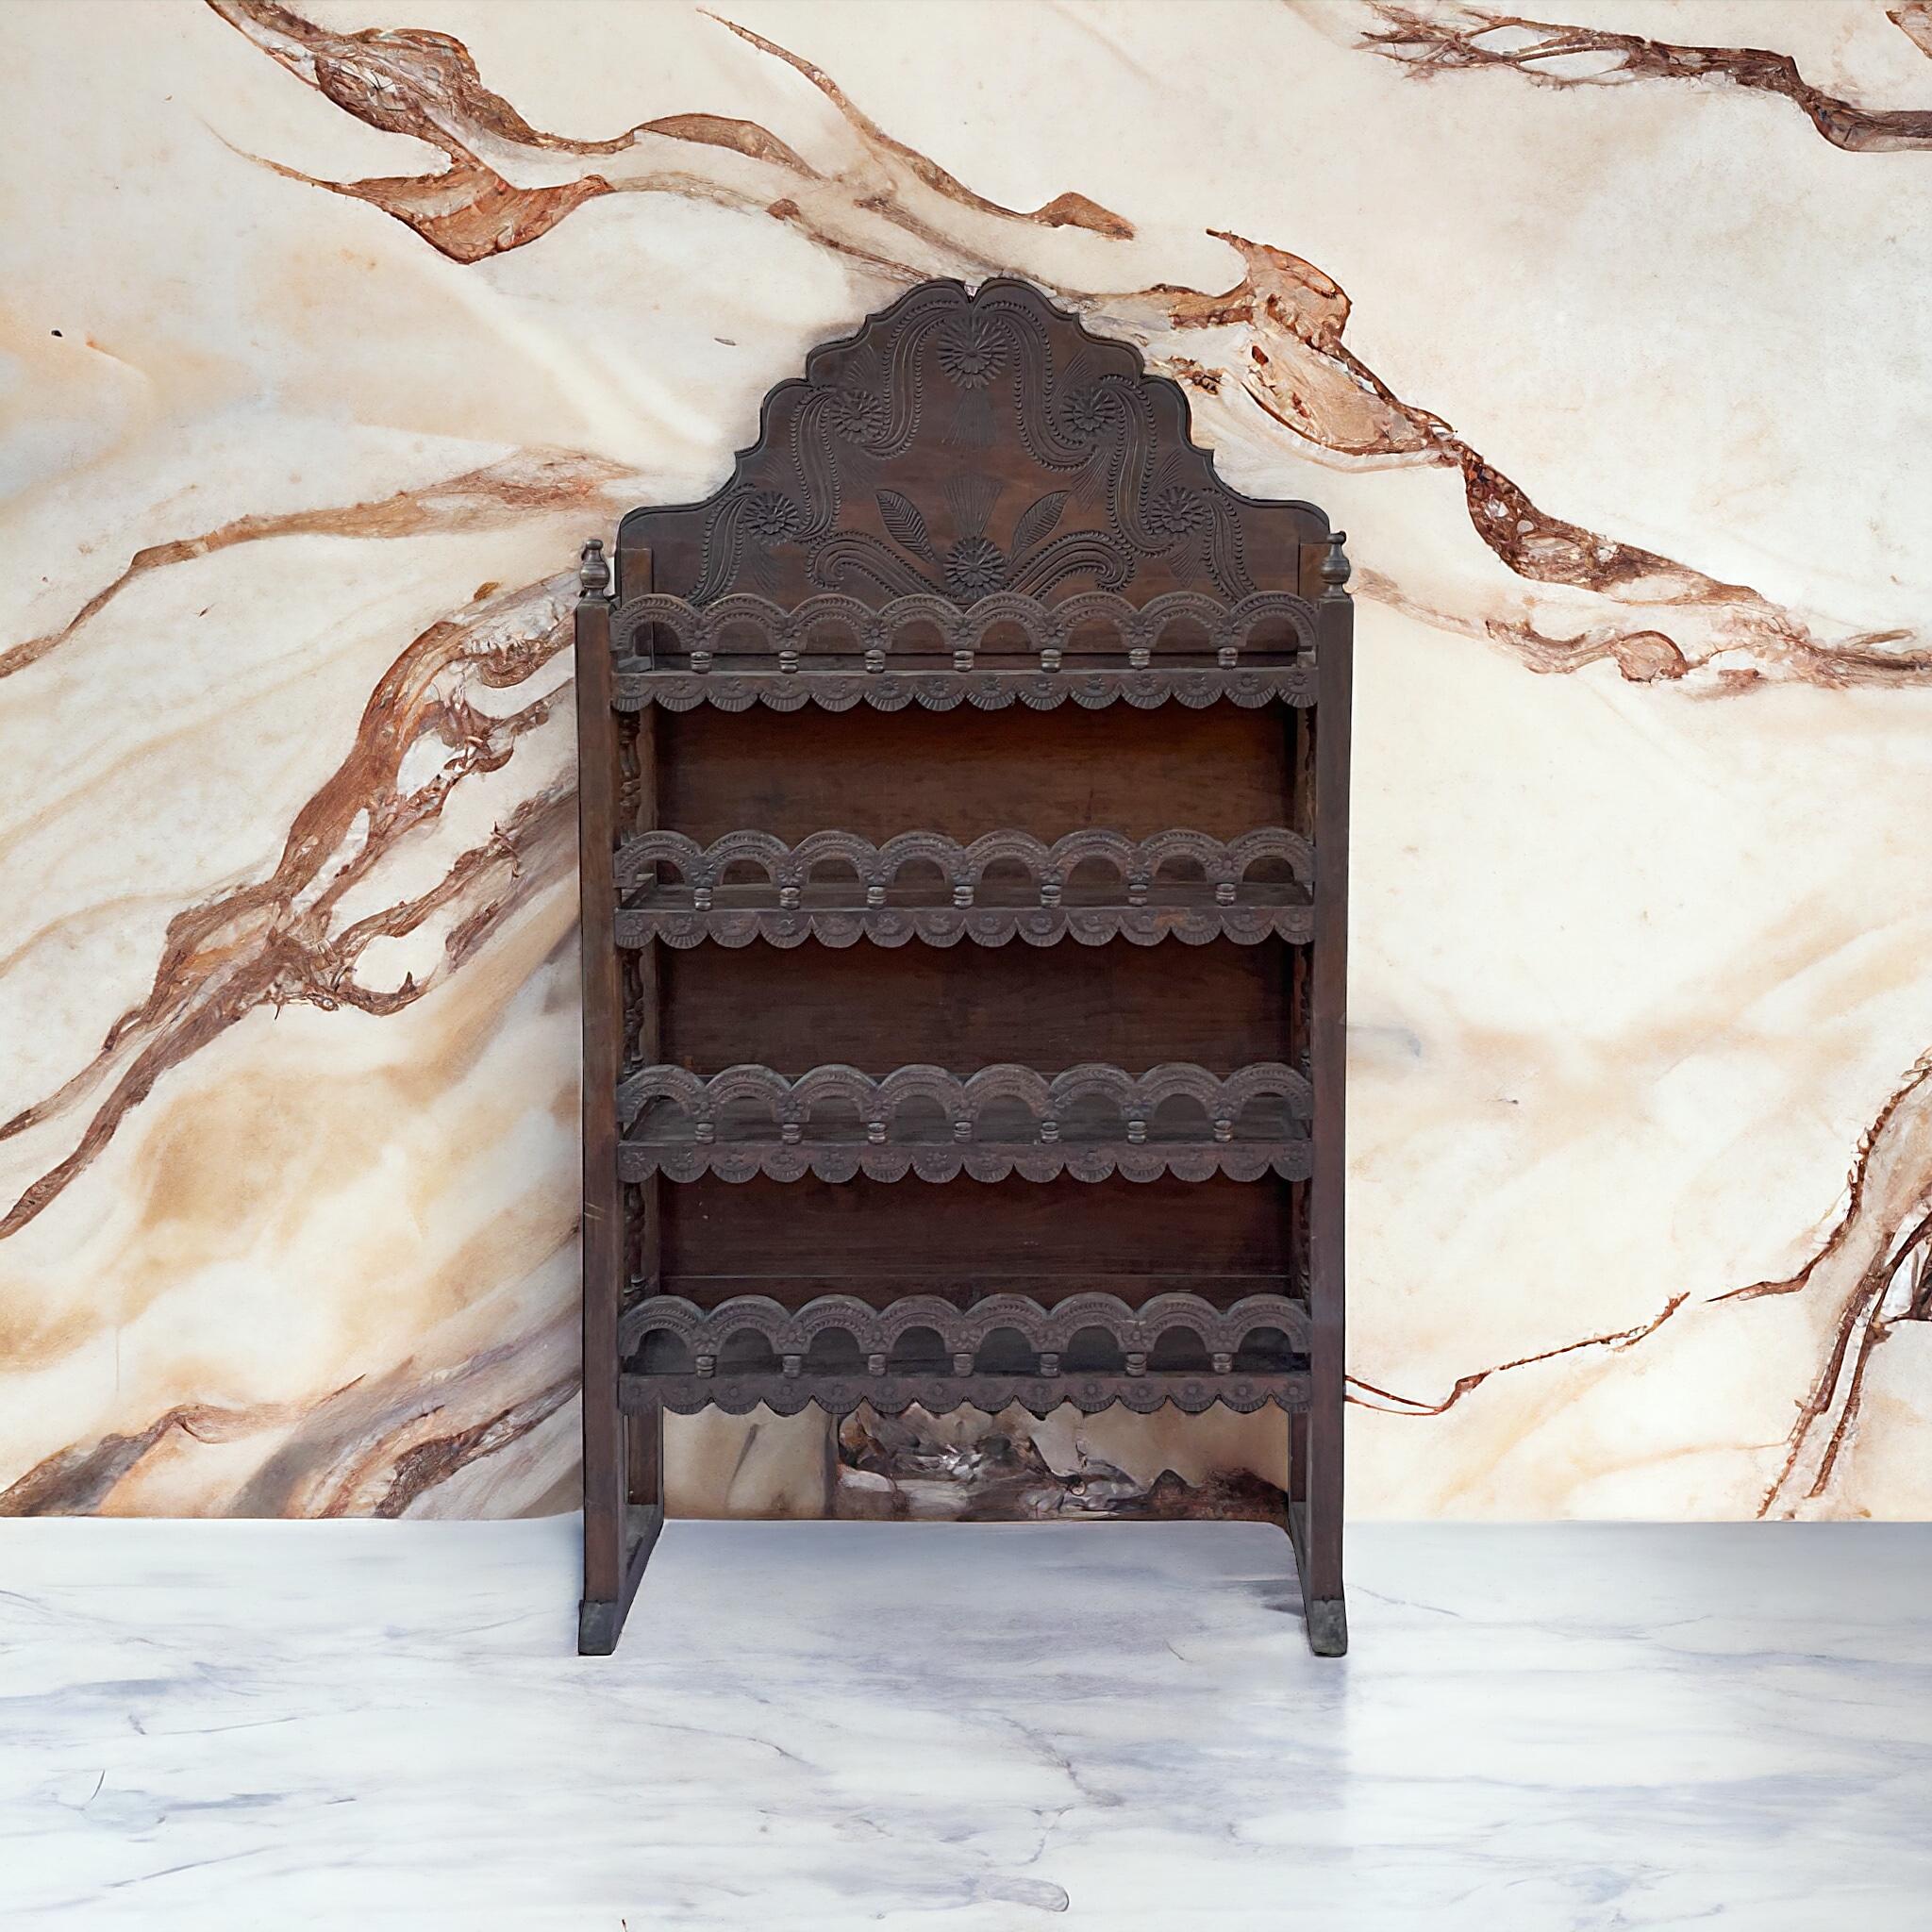 Moorish Early 20th-C. Moroccan Heavily Carved Fruitwood Bookcase / Etagere / Shelf For Sale